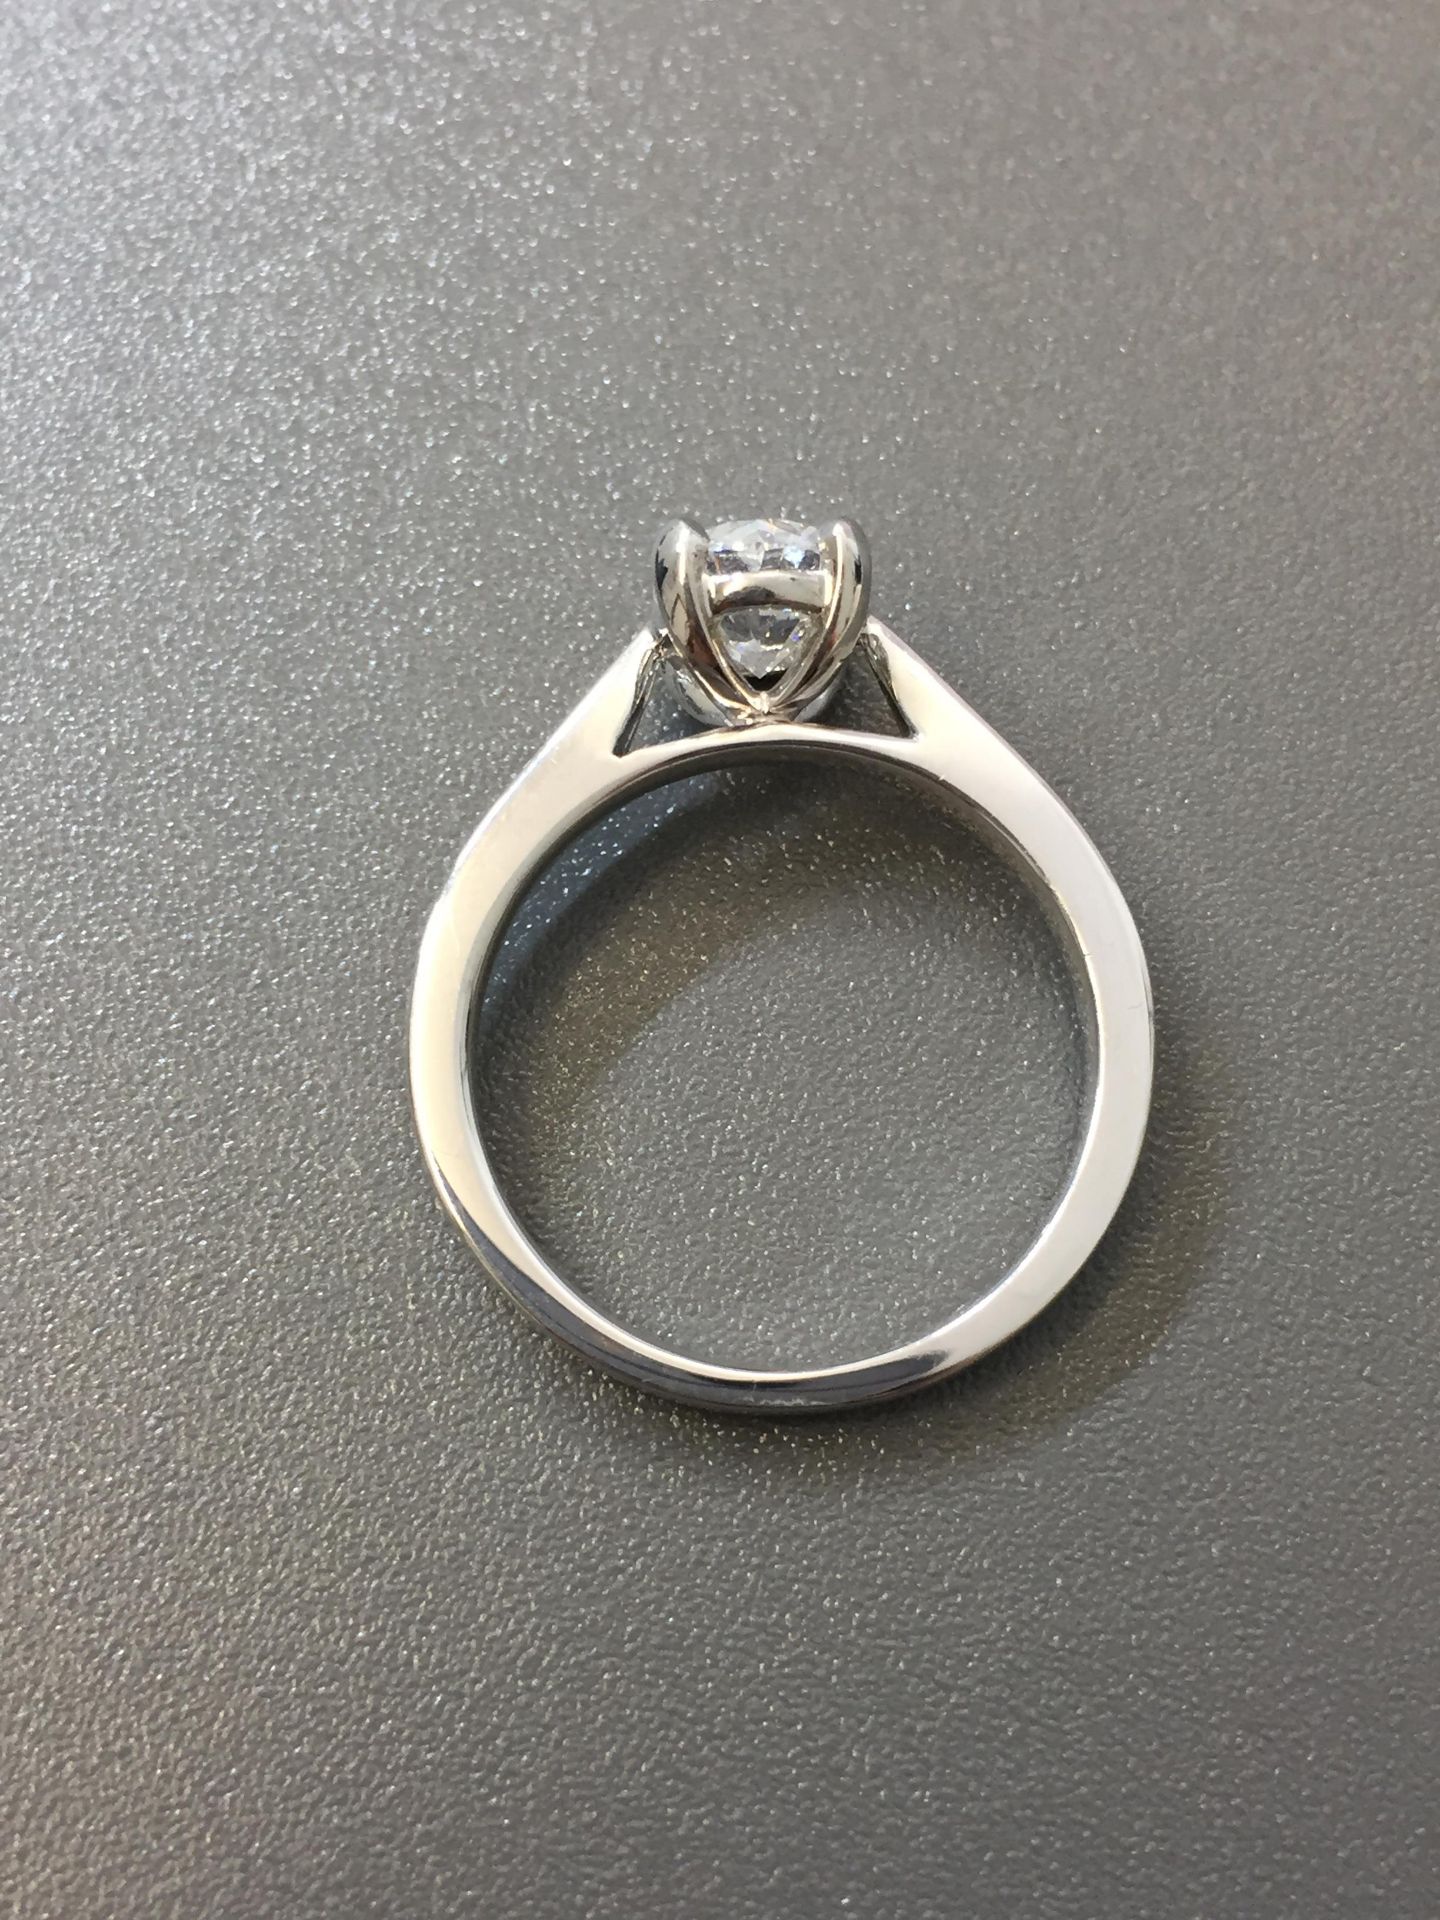 1.20ct diamond solitaire ring set with an oval cut diamond. F colour, si2 clarity.4 claw setting - Image 2 of 5